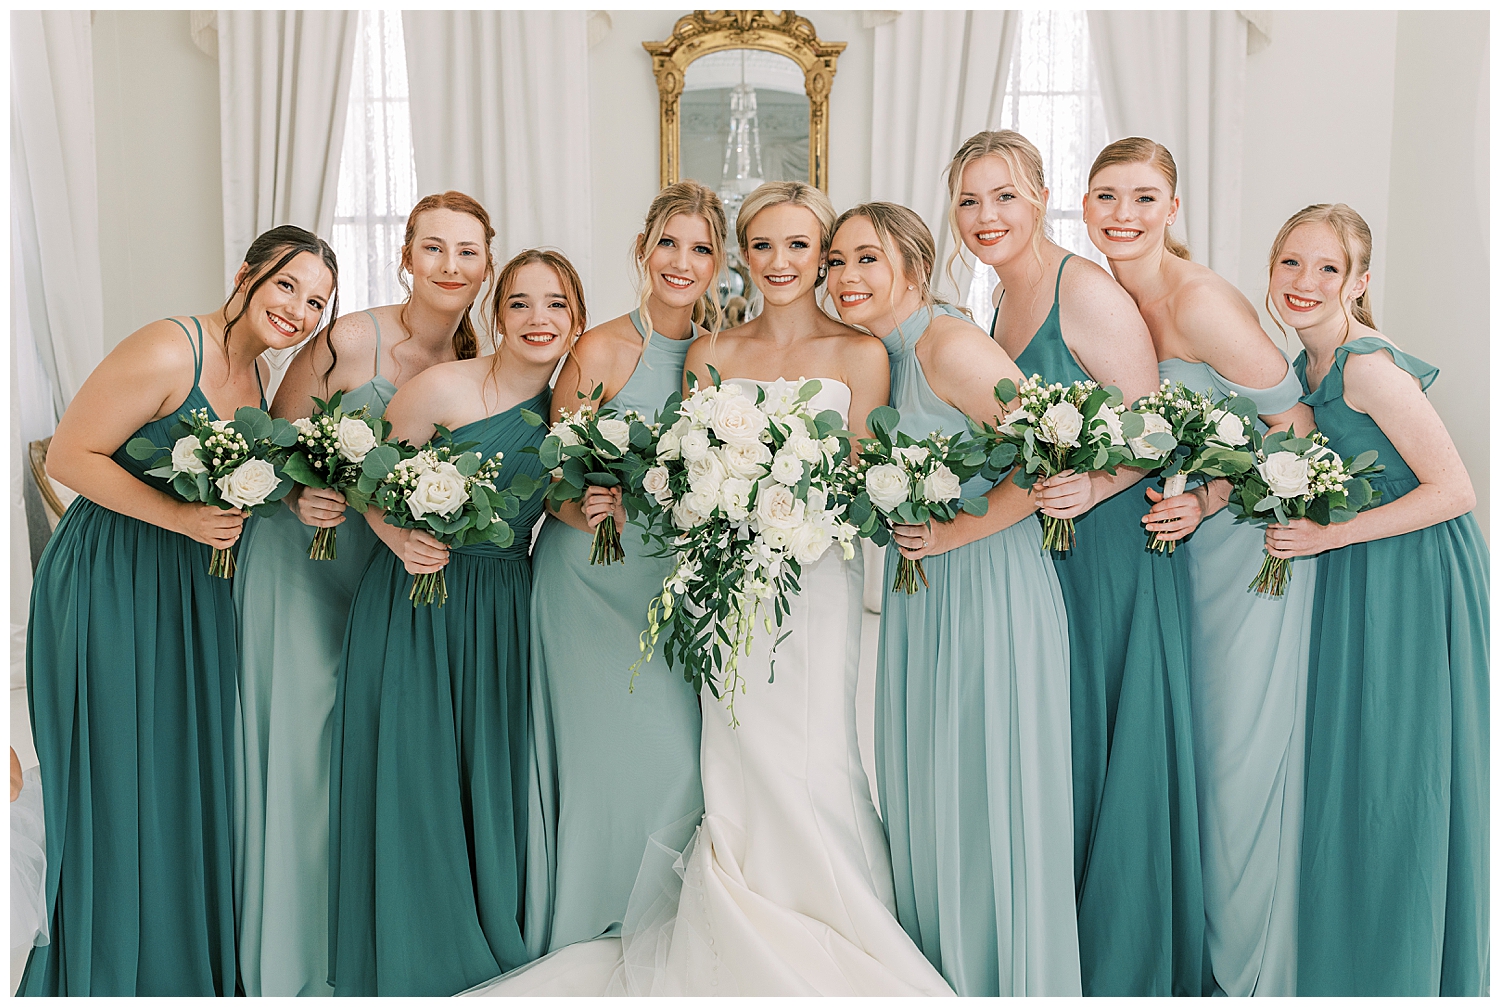 A bride stands with the bridesmaids in a white room.